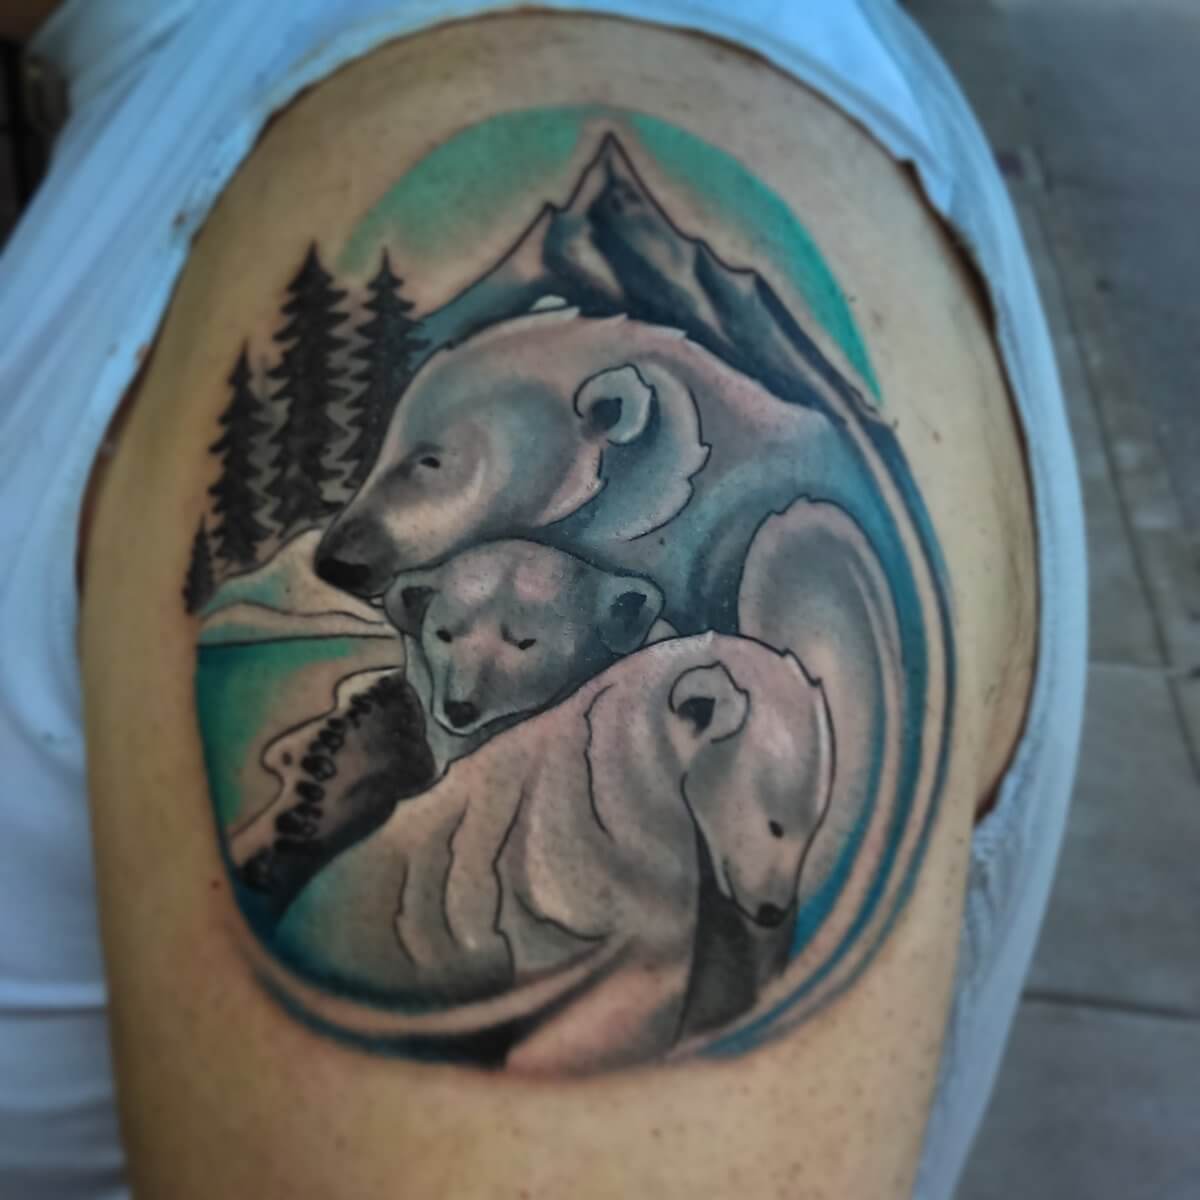 Polar Bear Tattoo Meaning: Exploring the Rich Meanings Infused into Body Ink